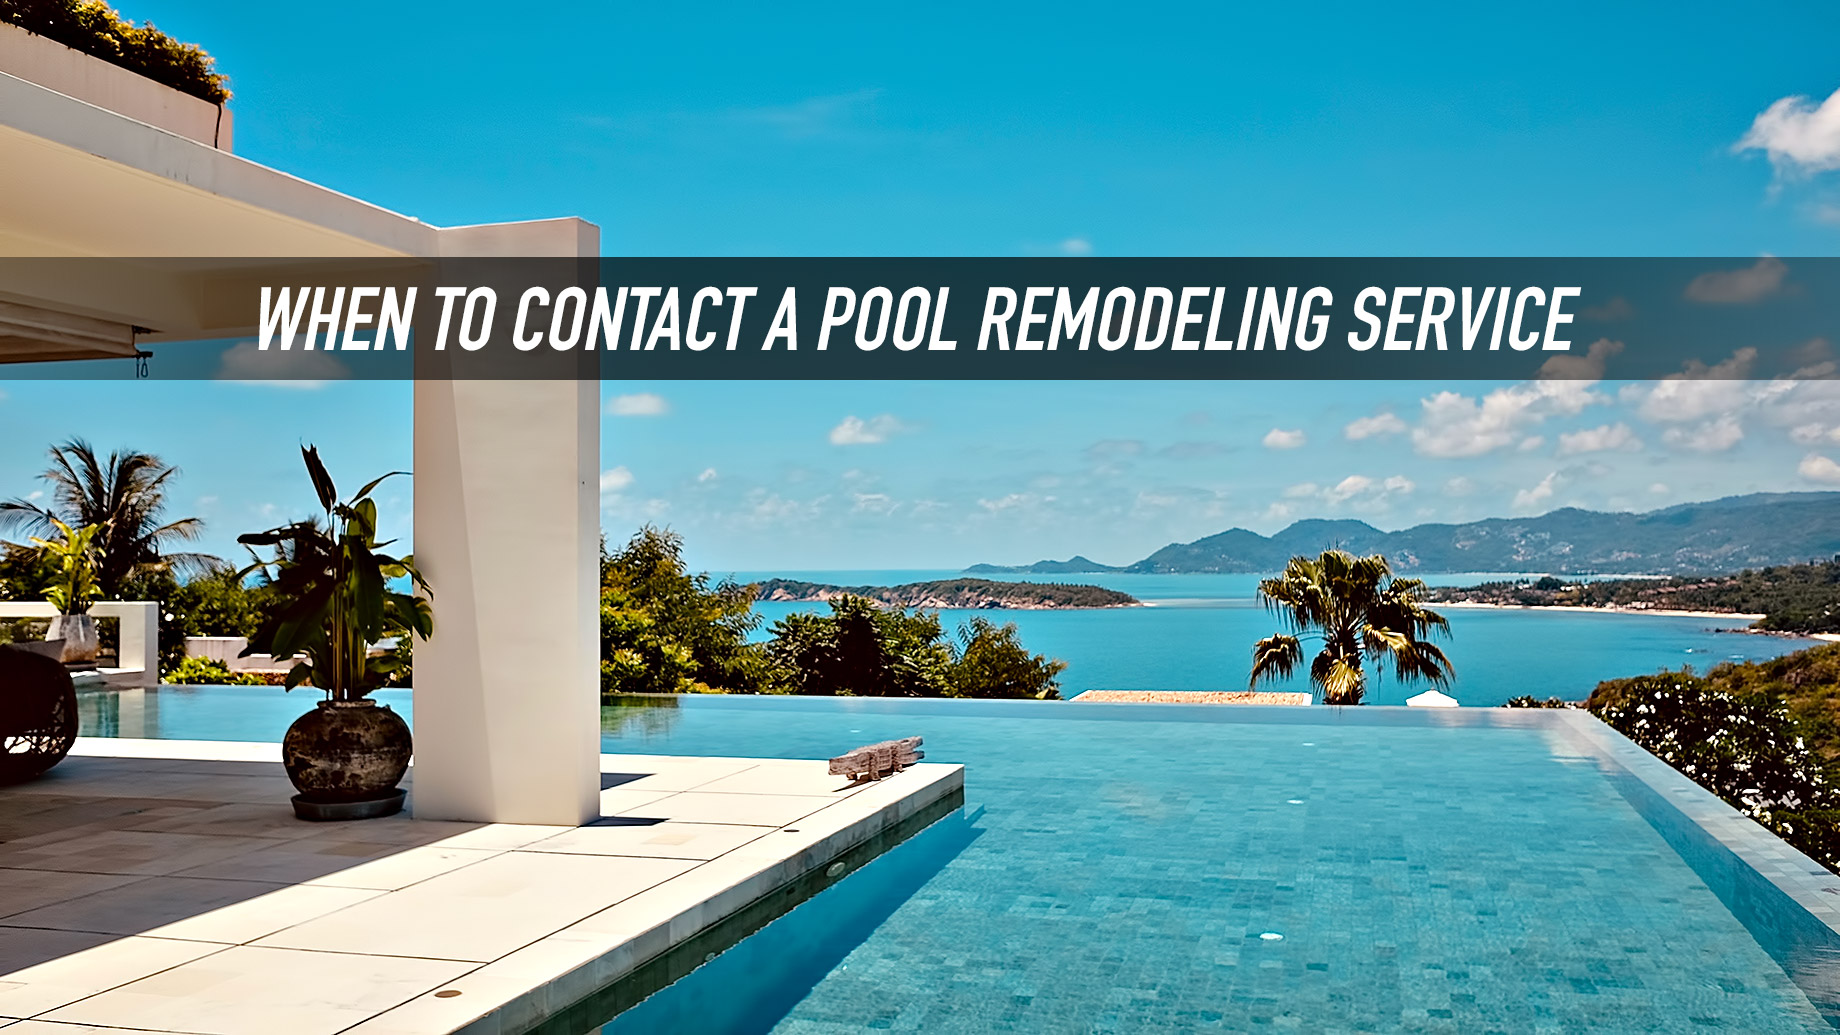 When to Contact a Pool Remodeling Service